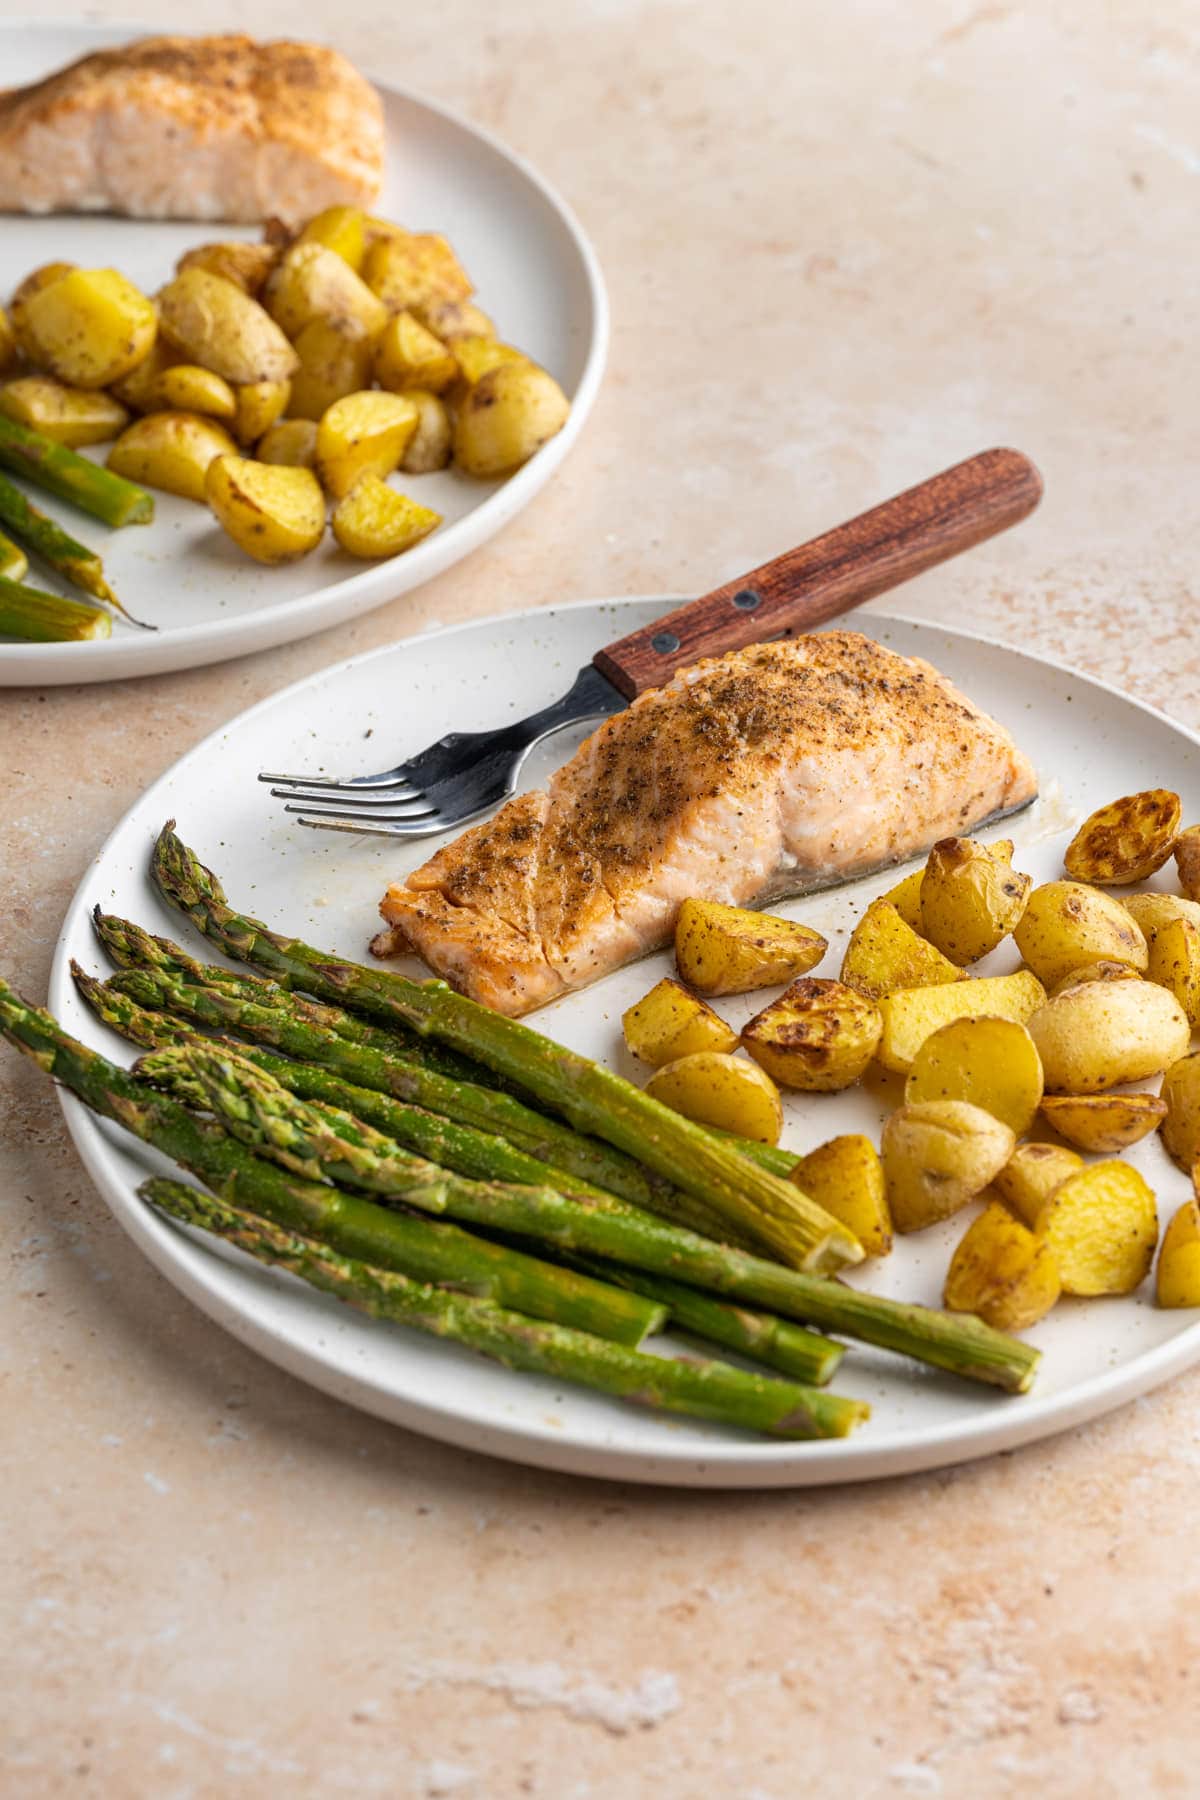 Simple dinner plate with salmon asparagus and potatoes